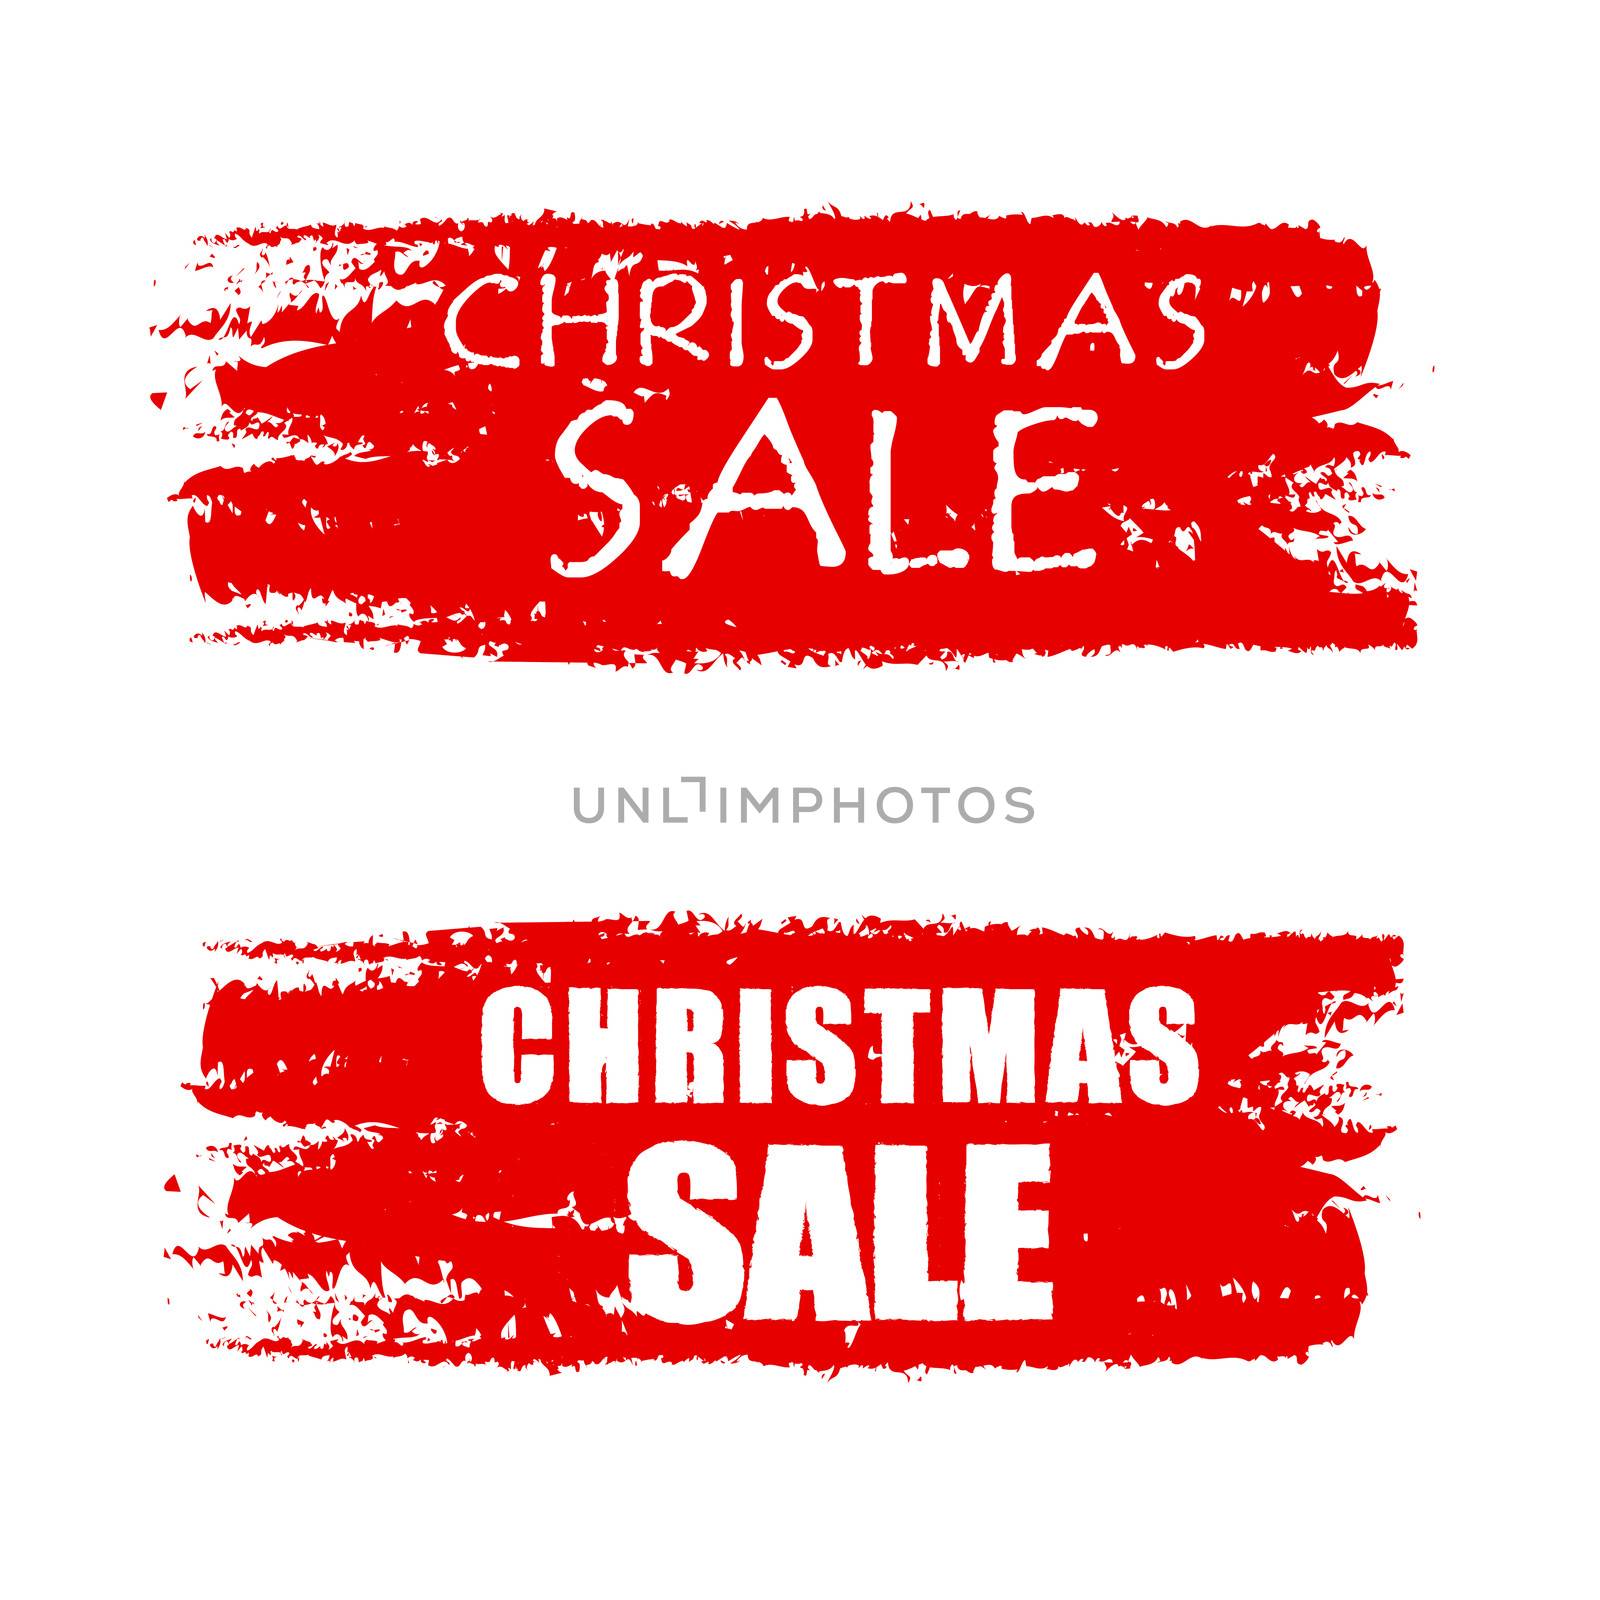 christmas sale - text on red drawn banners, business holiday concept